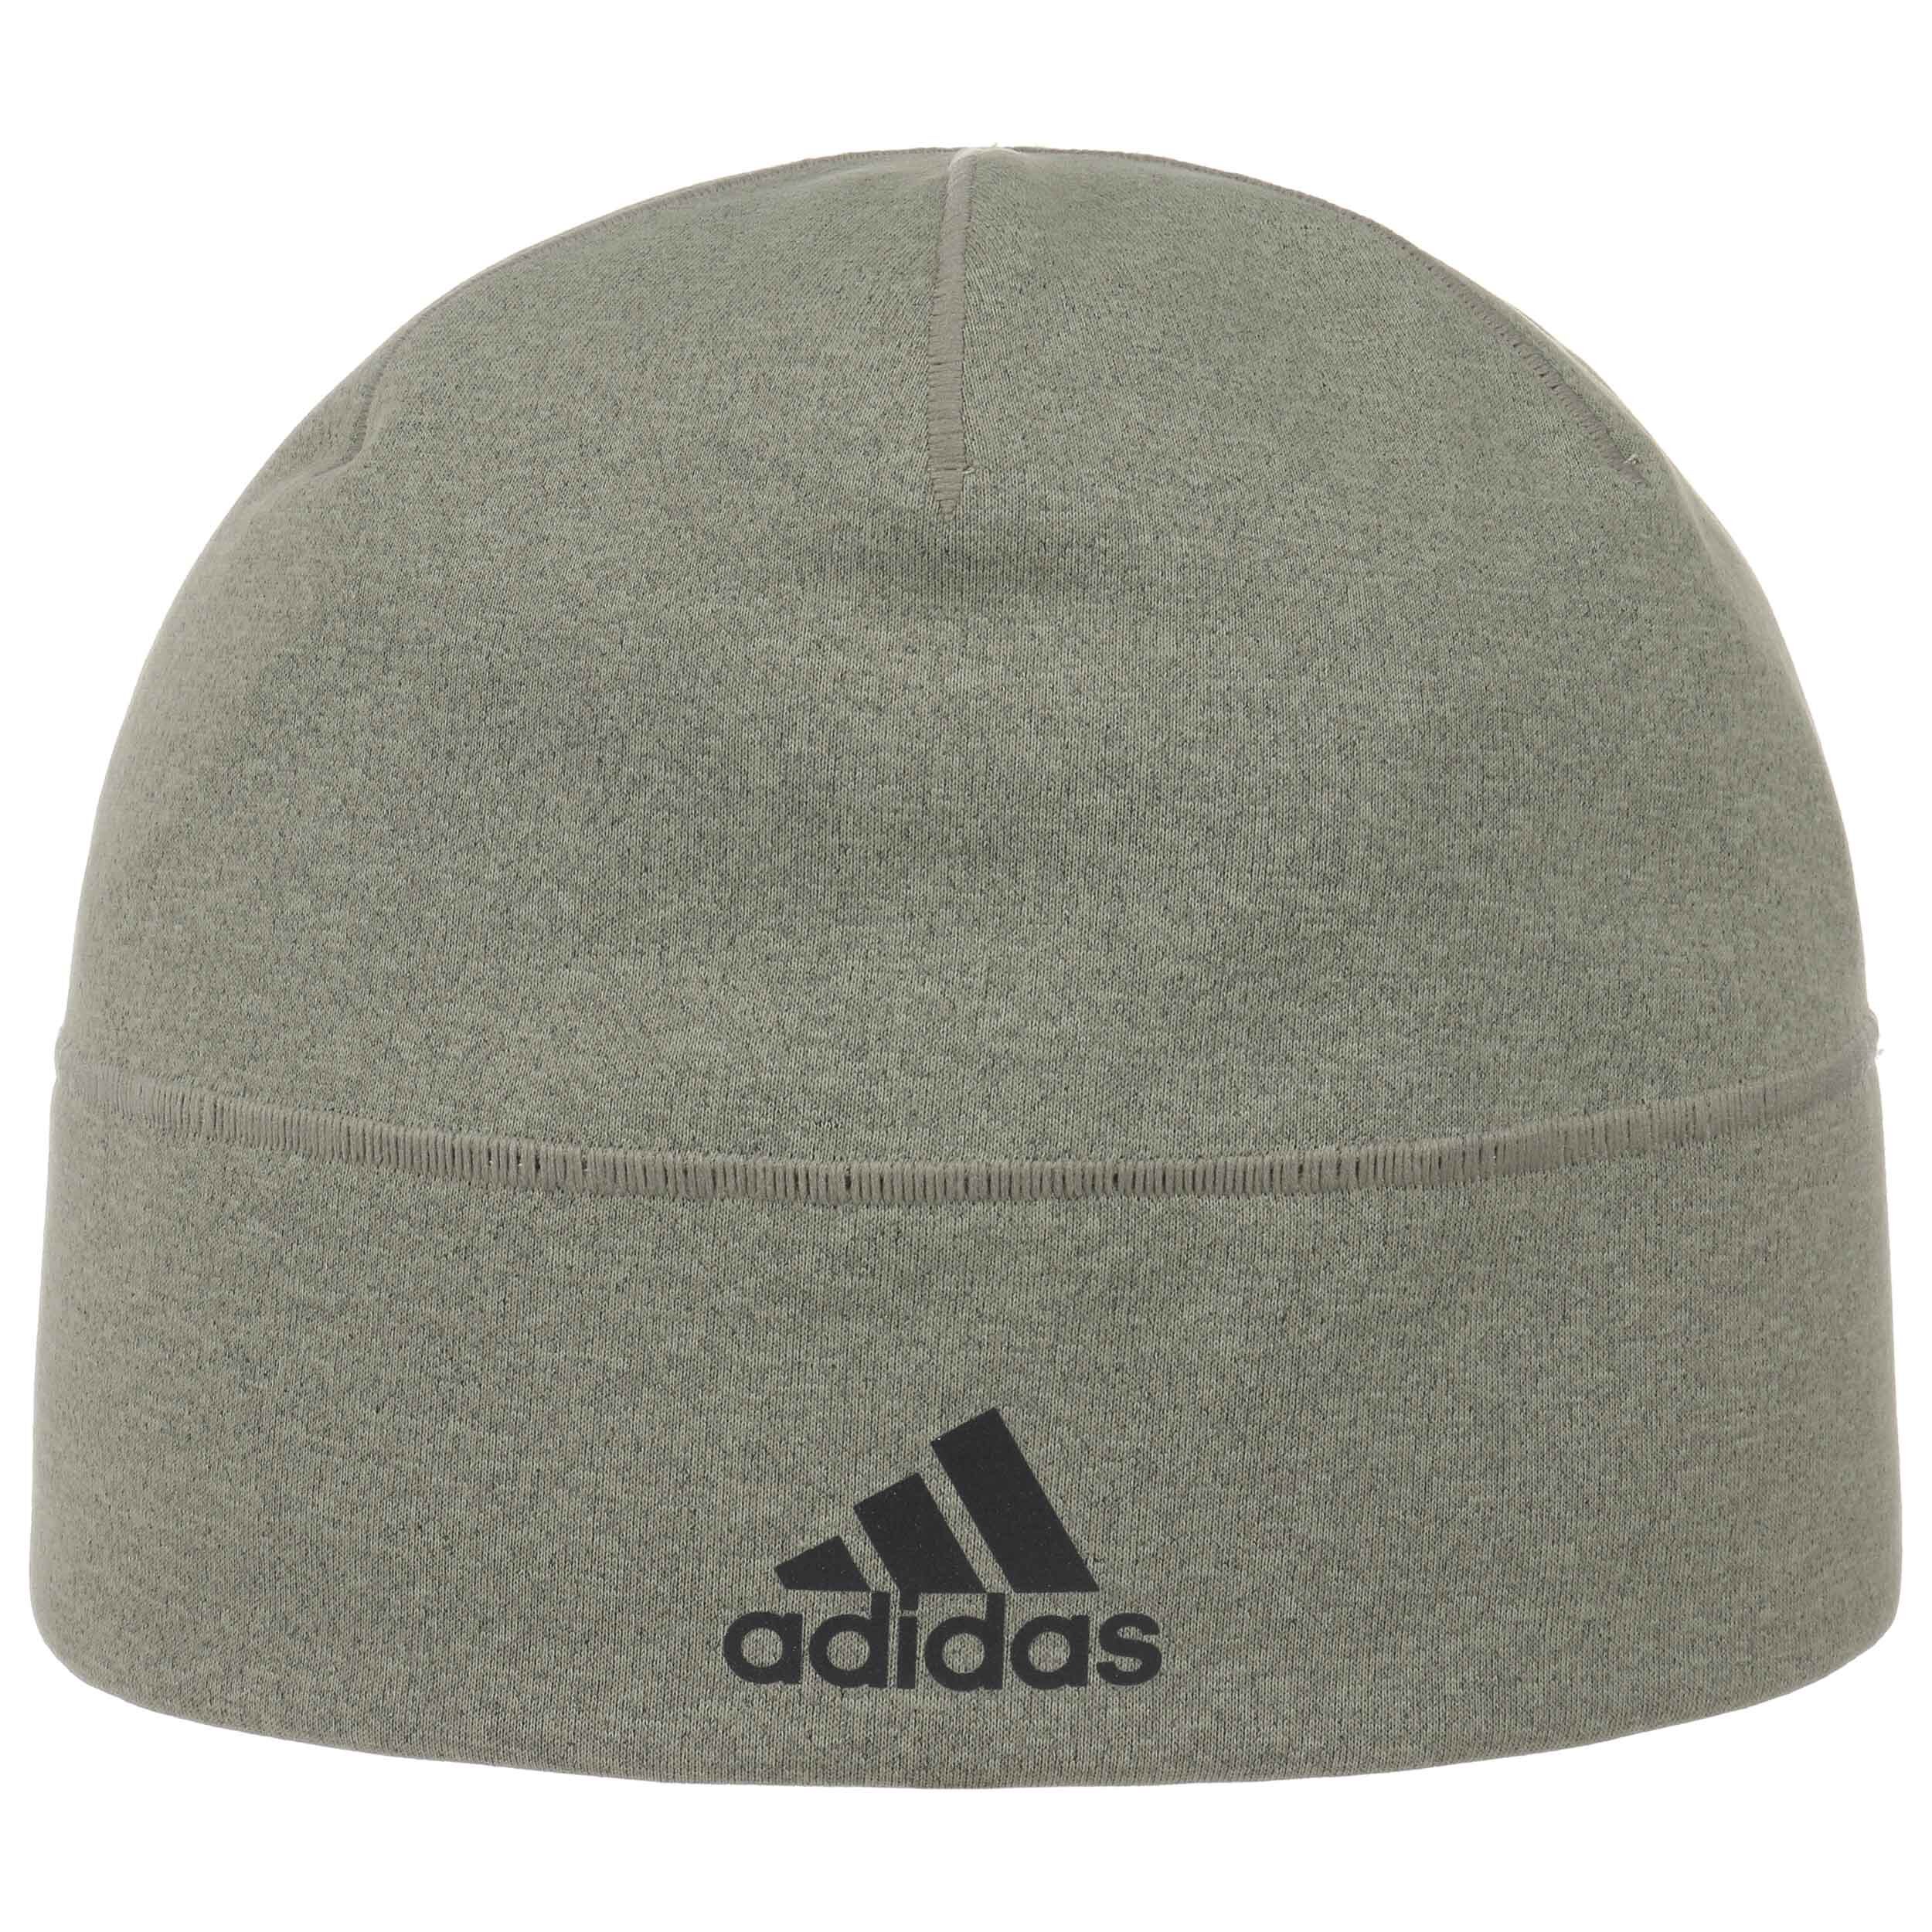 Beanie Climaheat Performance by adidas - €